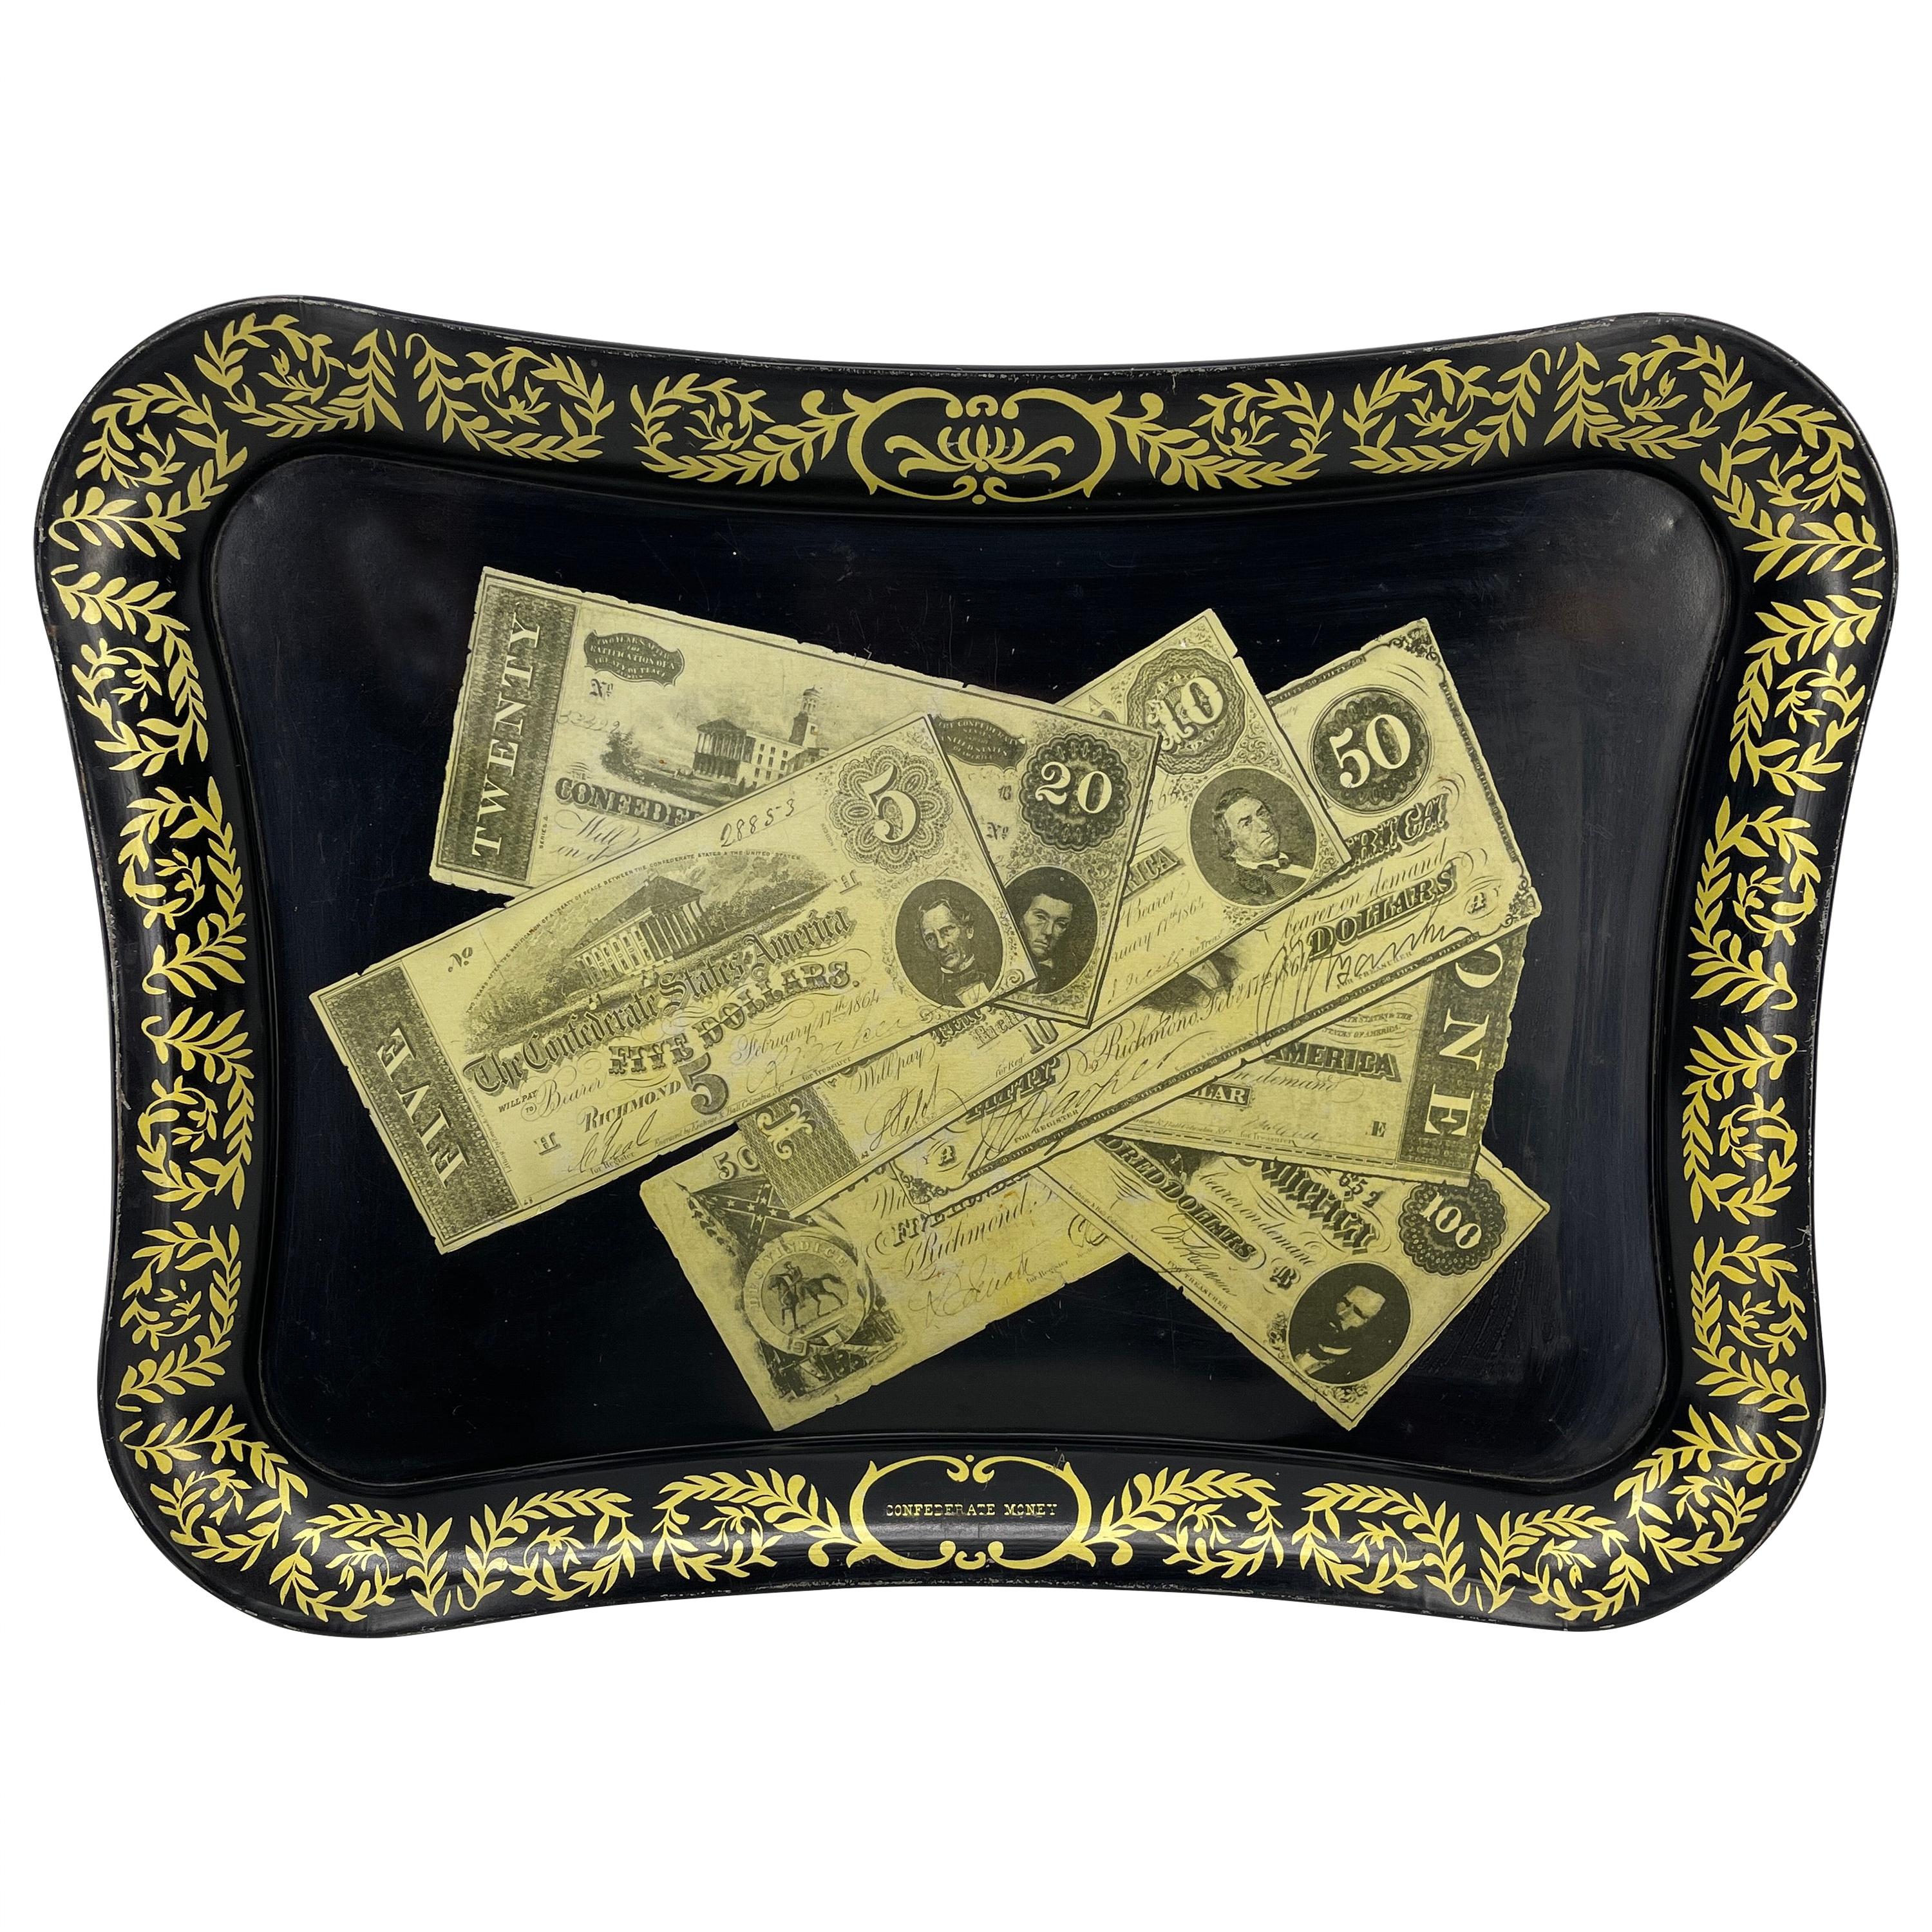 Mid-Century Modern Fornasetti Style Metal Tray with Confederate Money Notes